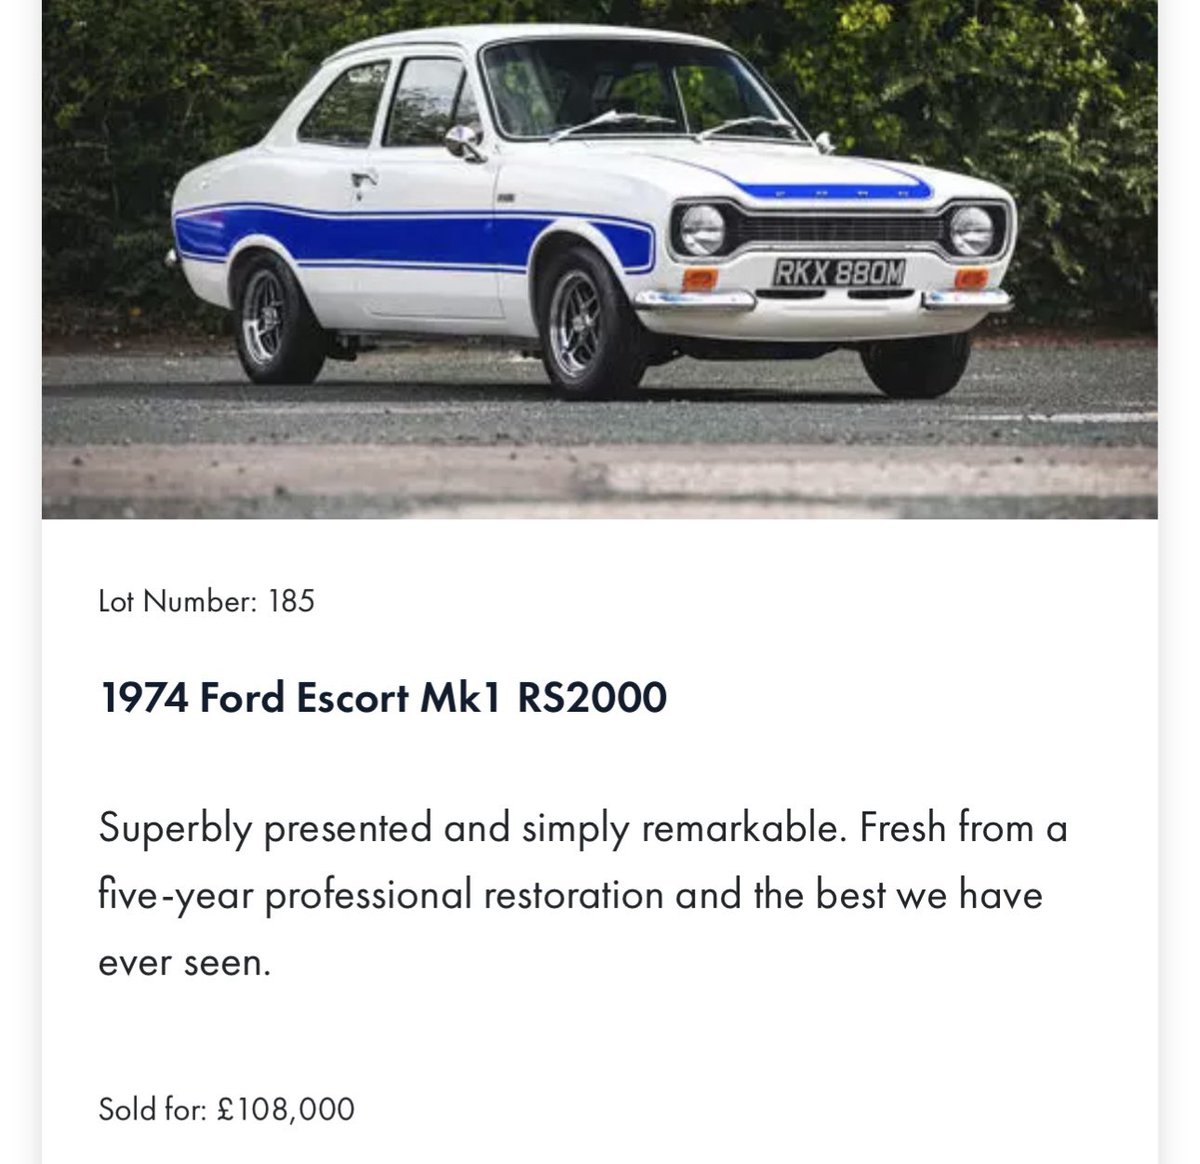 Big Fords fetching big money #ford #fordrs #fordsierrars500 #fordescortcosworth #RS #escortrs2000